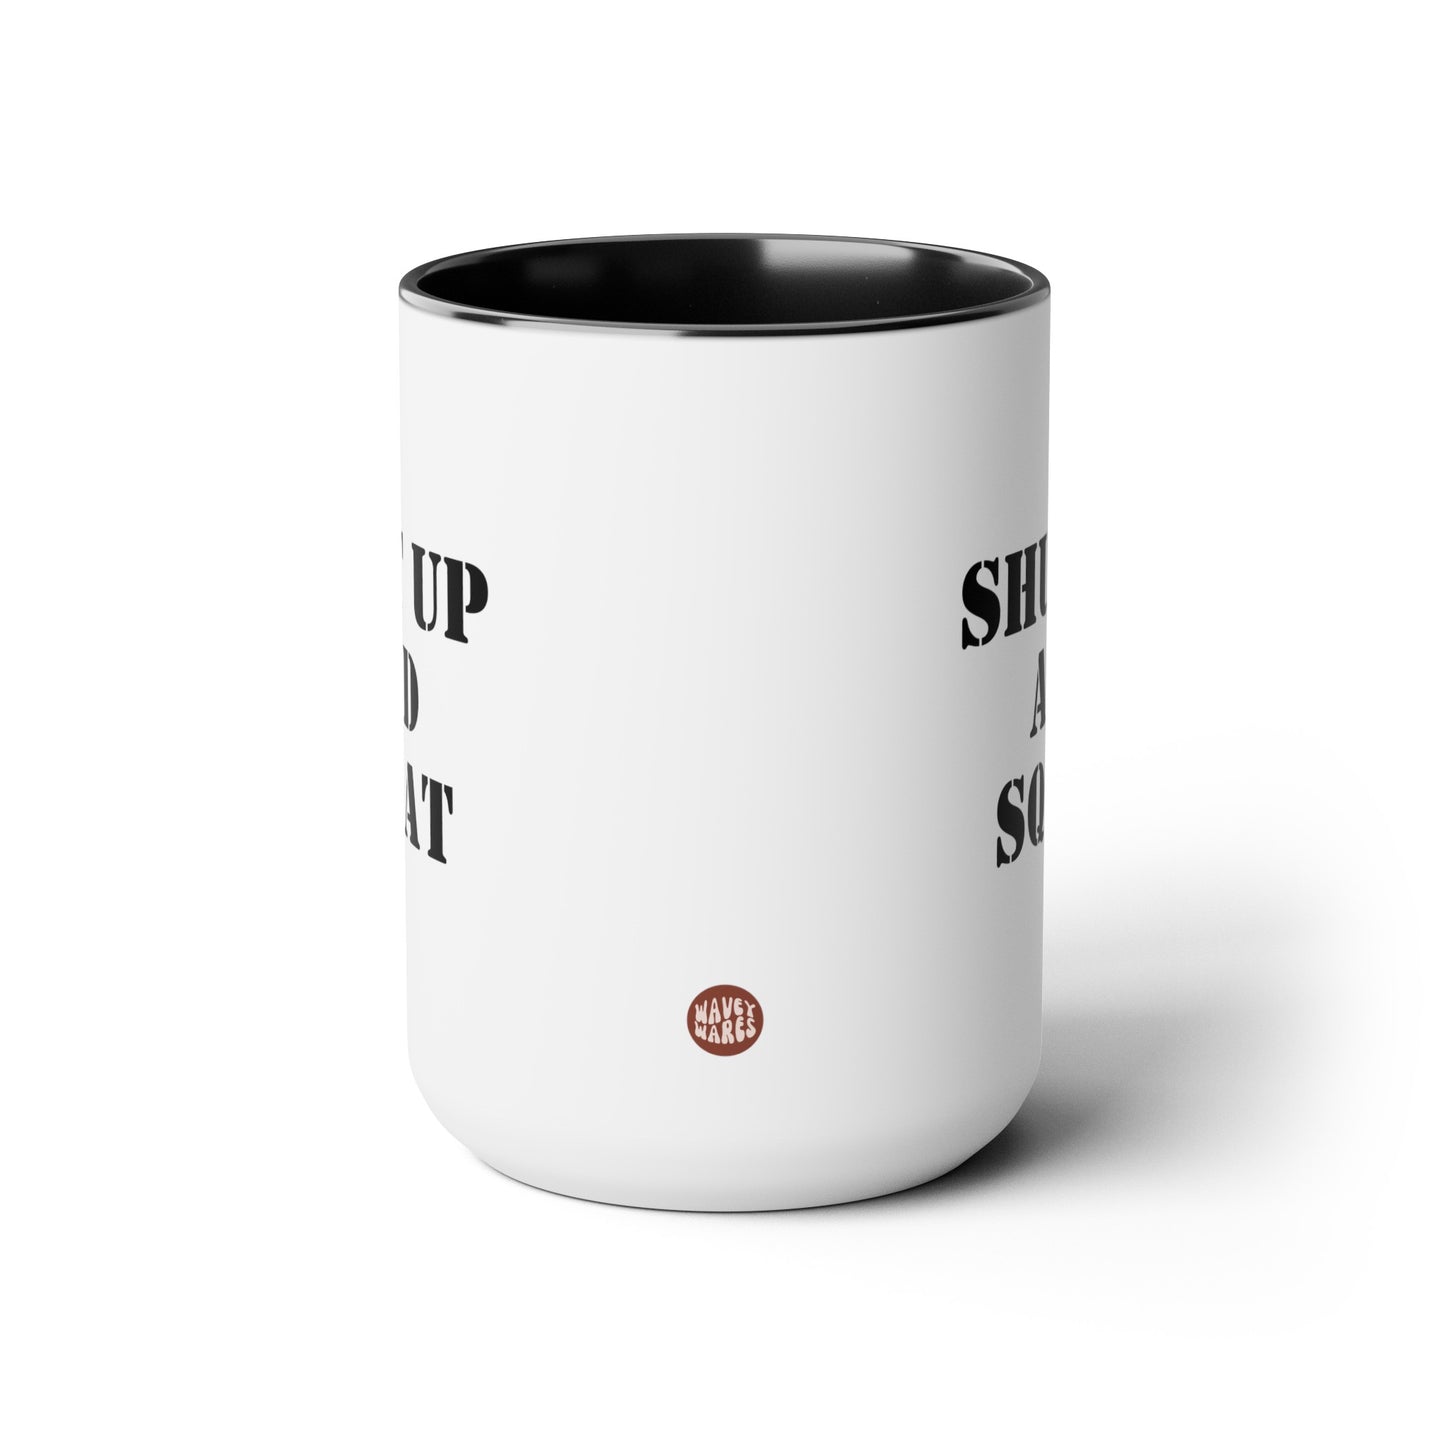 Shut Up And Squat 15oz white with black accent funny large coffee mug gift for gym rat weightlifting friend powerlifting bodybuilding work out fitness lover girl  waveywares wavey wares wavywares wavy wares side